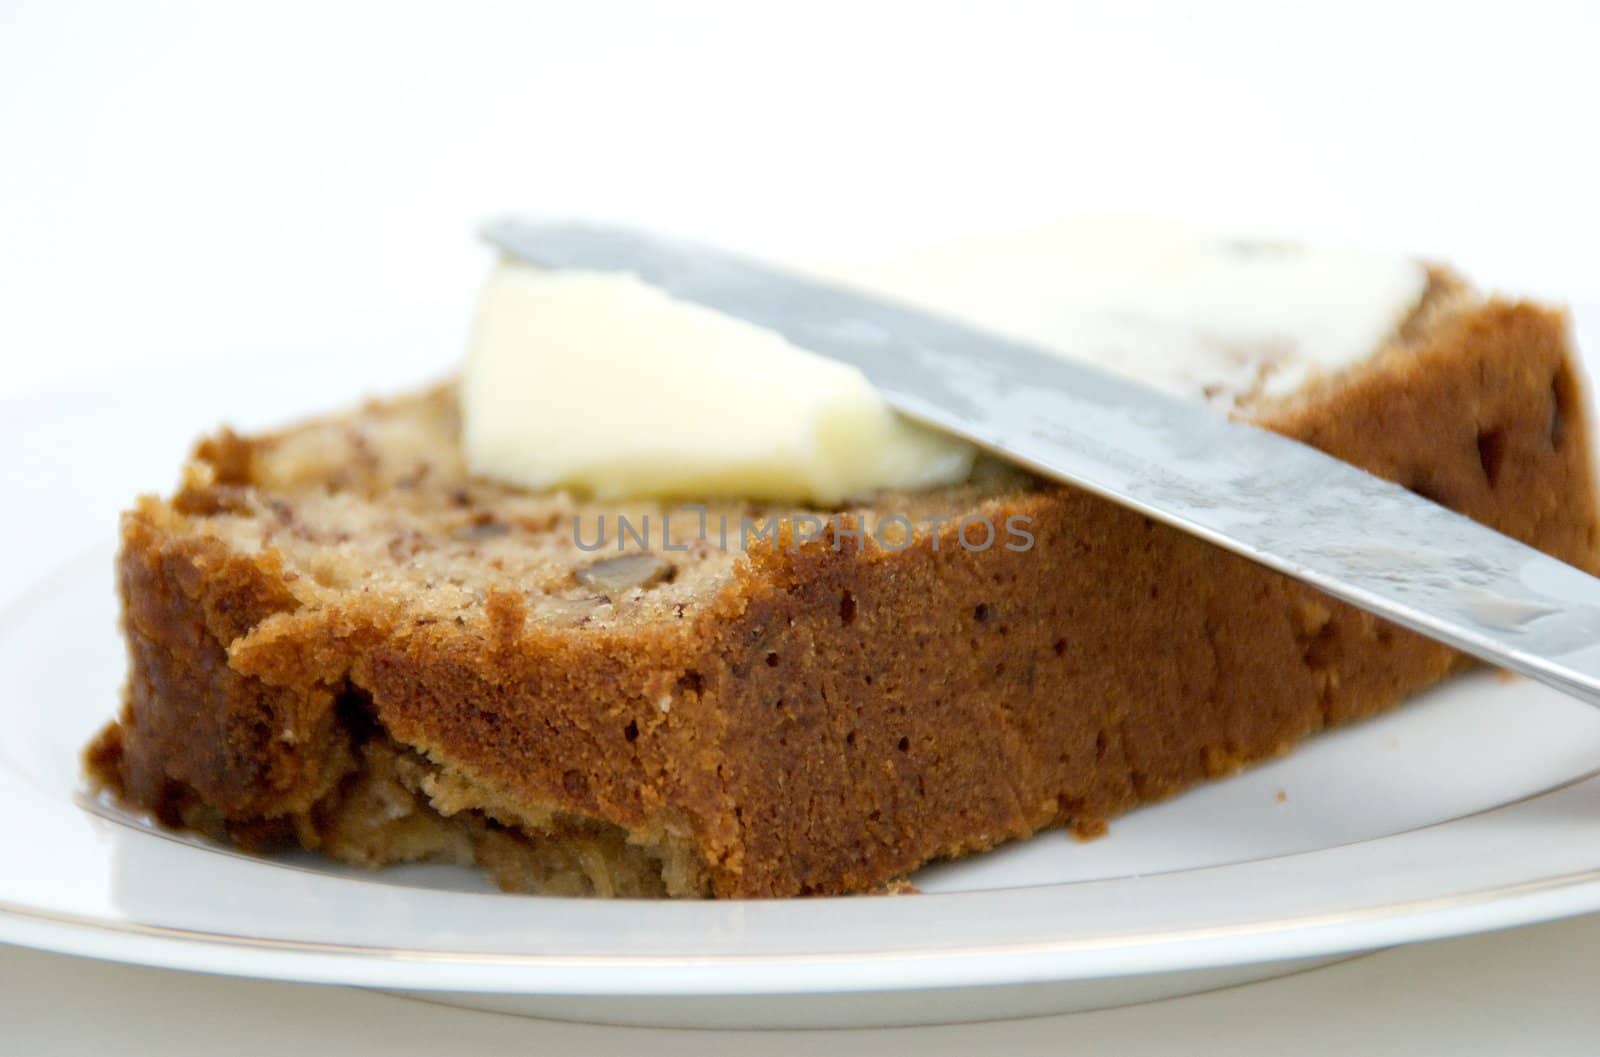 A slice of banana bread with butter.